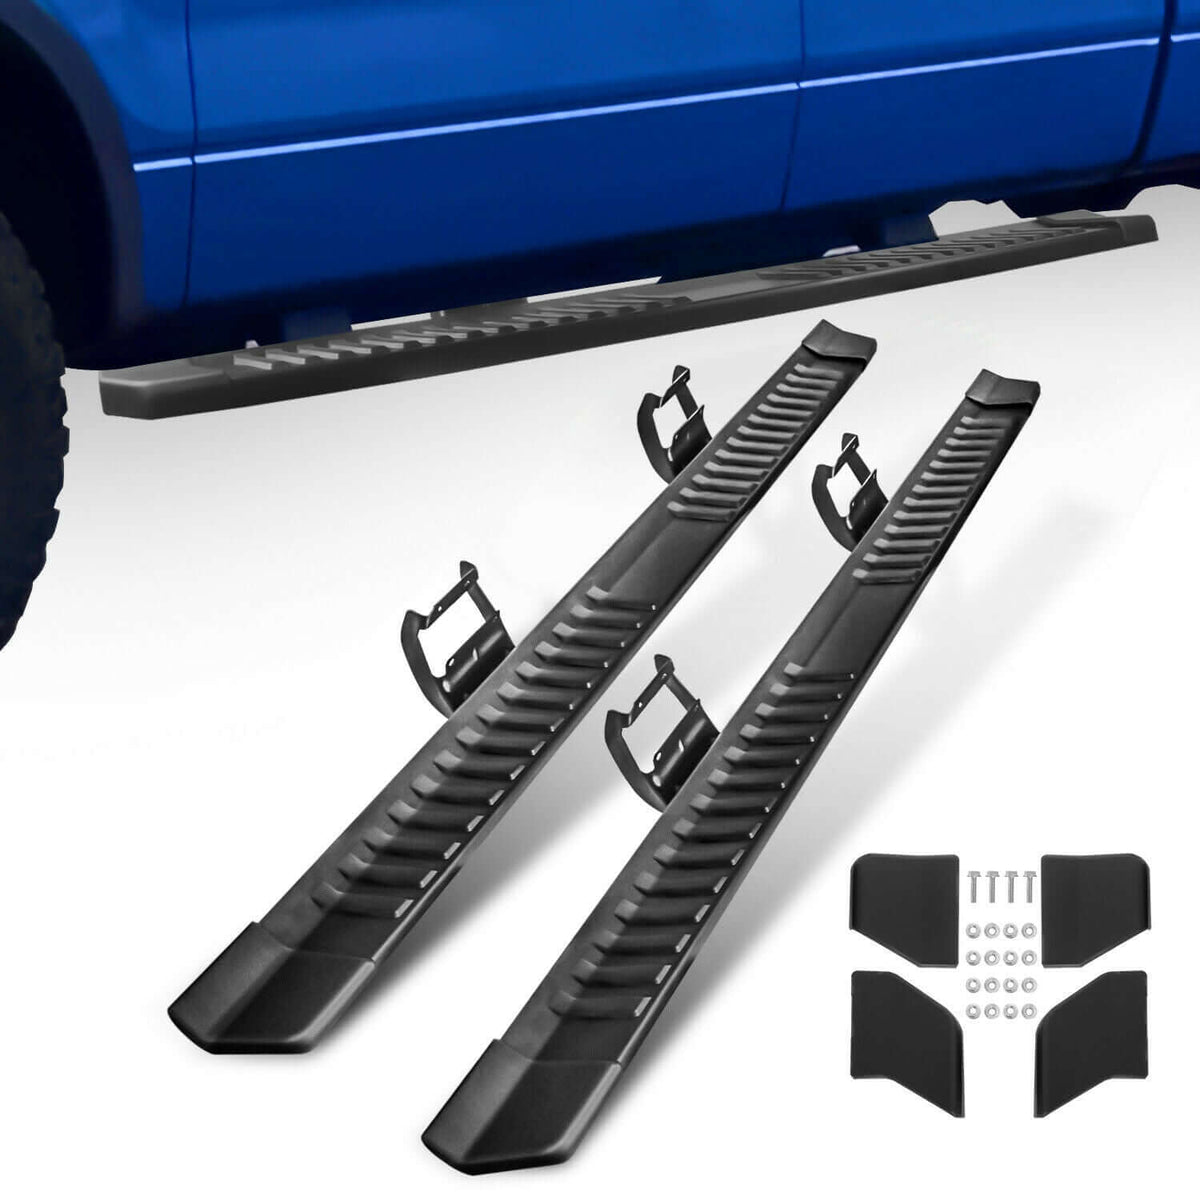 {WildWell}{Ford F150 Running Boards}-{Ford F150 Running Boards 2004-2014/1}-right